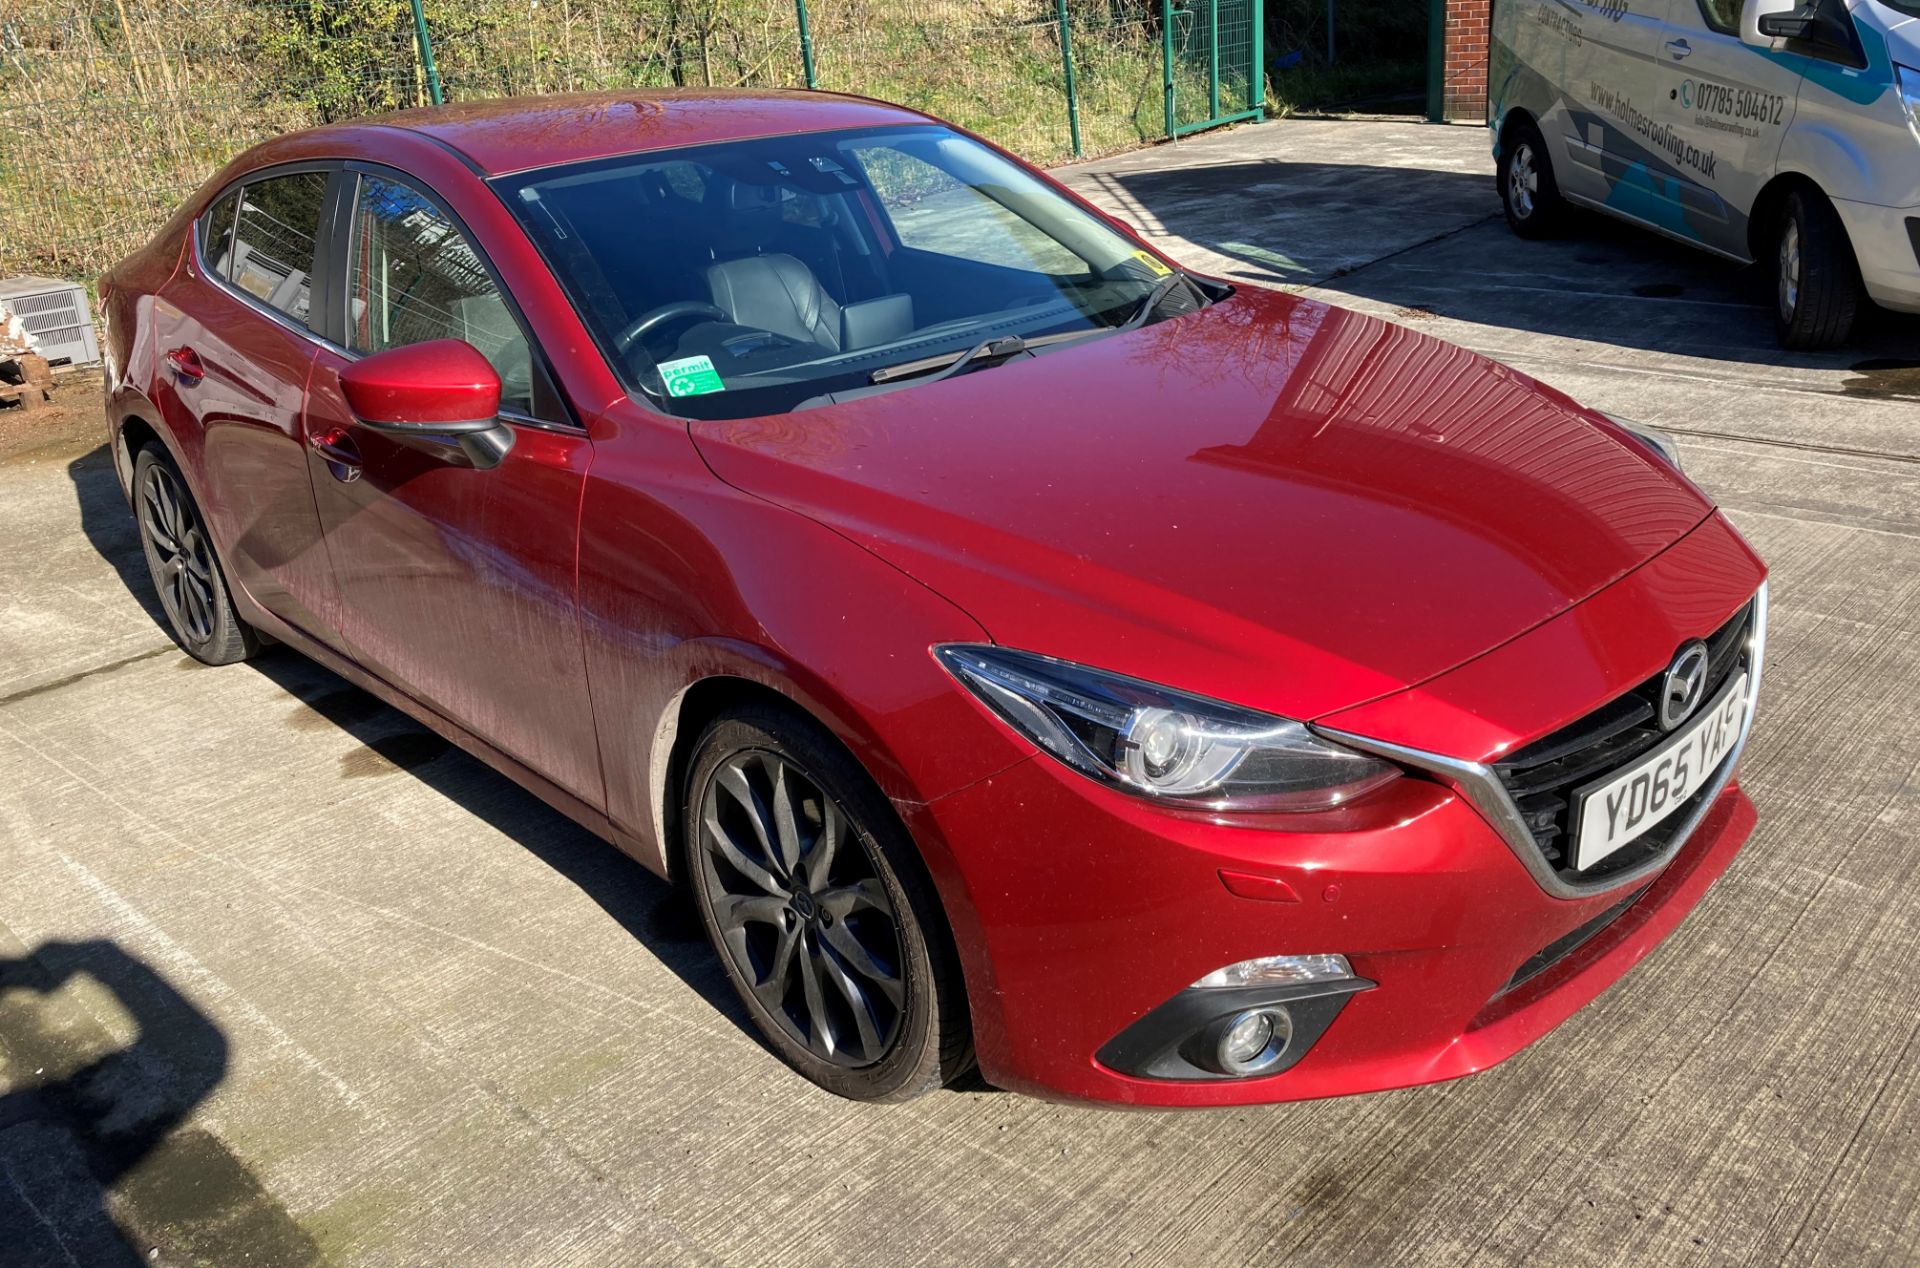 MAZDA 3 SPORT NAV 2.0 four door saloon - petrol - red with black leather interior. - Image 20 of 27